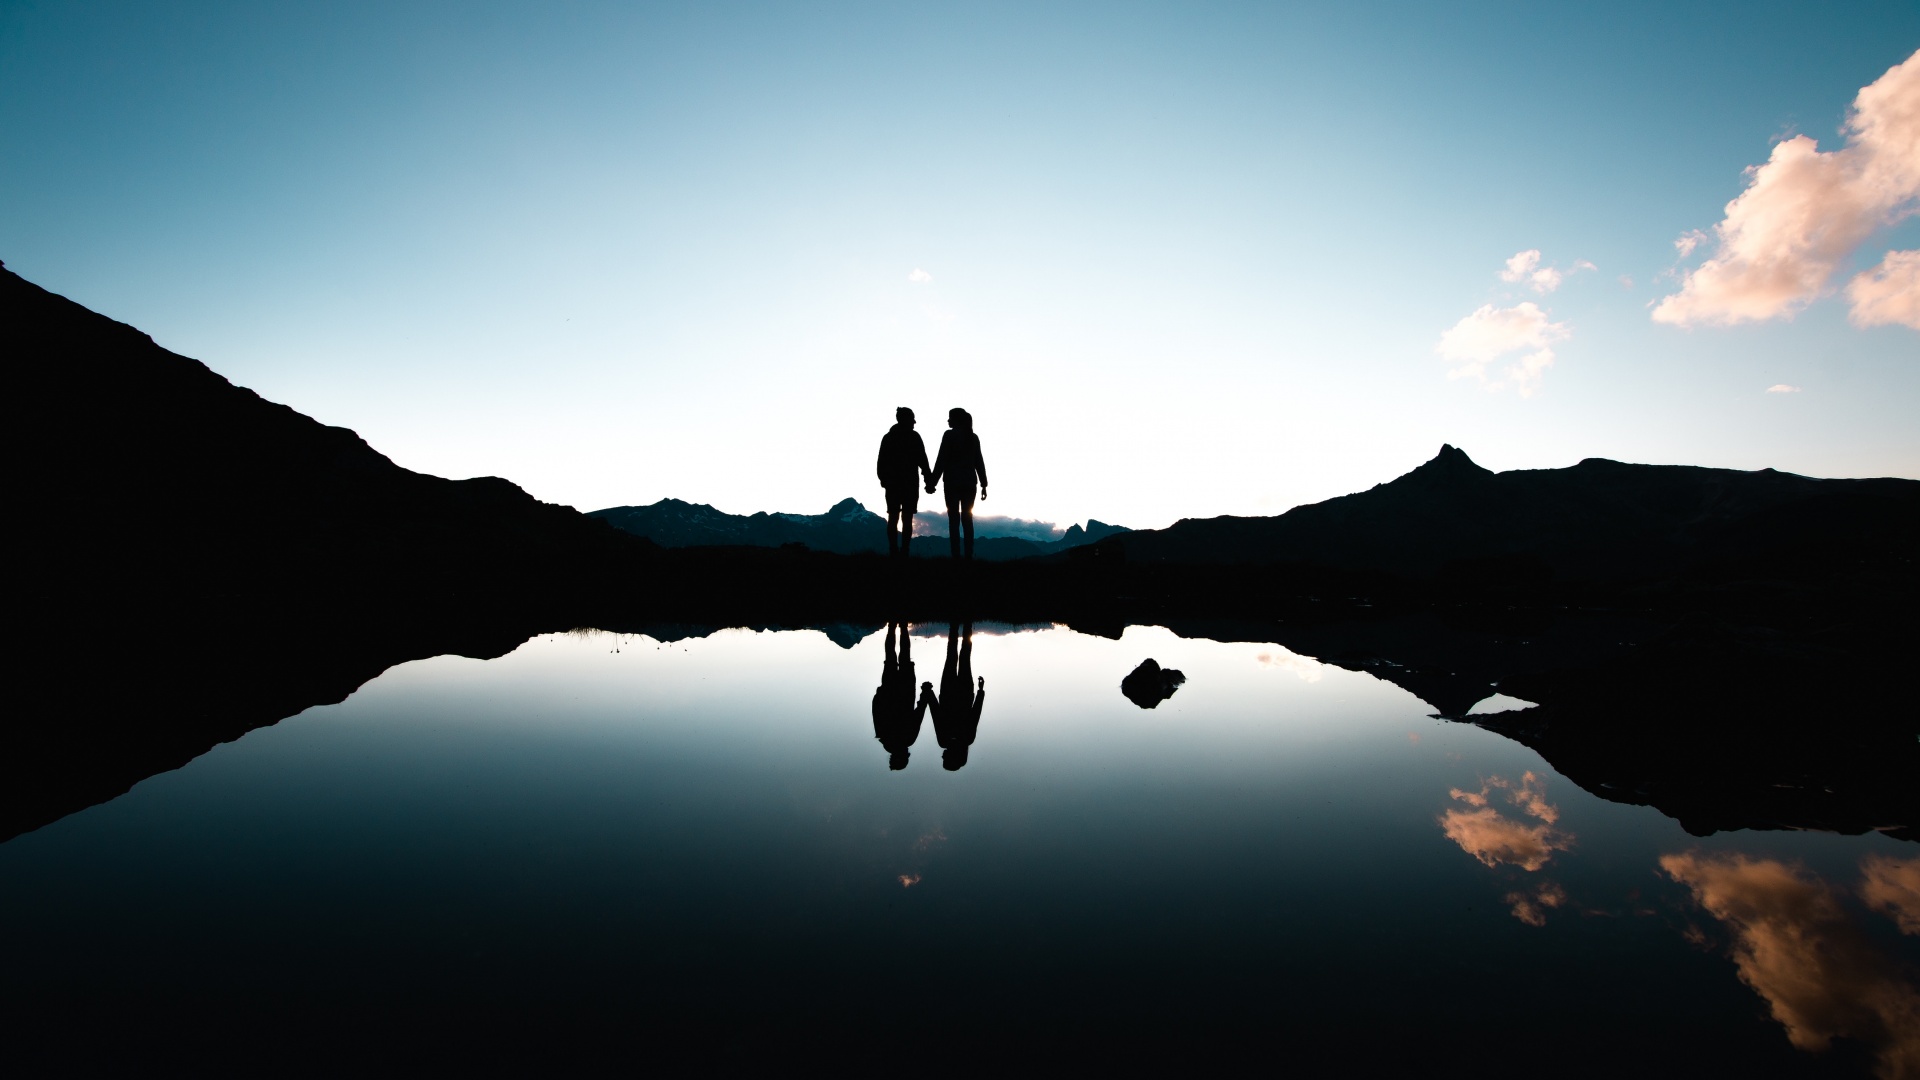 Couple Wallpaper 4K, Silhouette, Together, Holding hands, Romantic